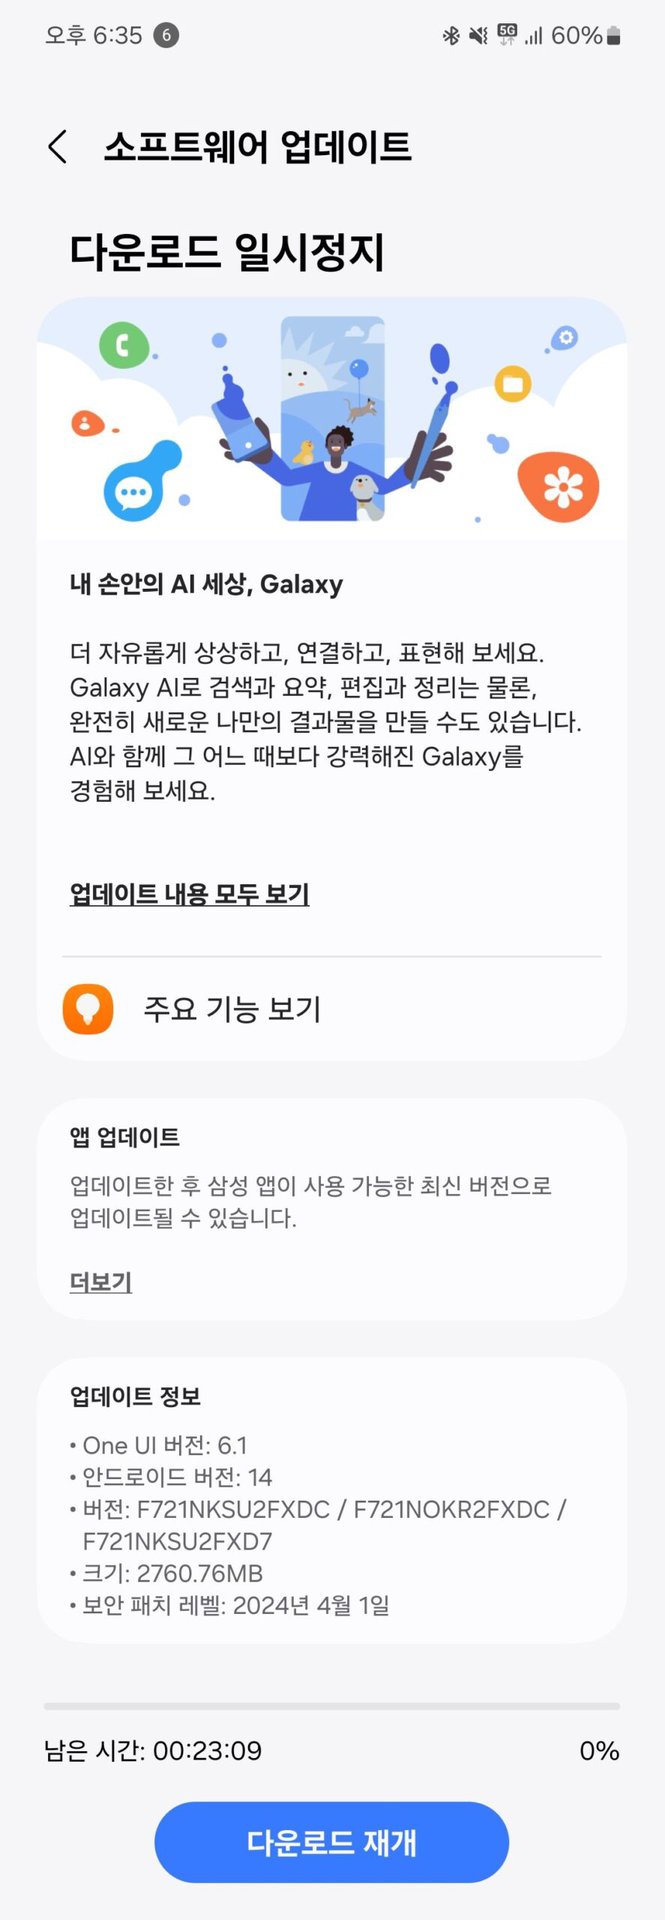 Samsung rolls out One UI 6.1 with Galaxy AI to Galaxy S21 series and its previous gen foldables